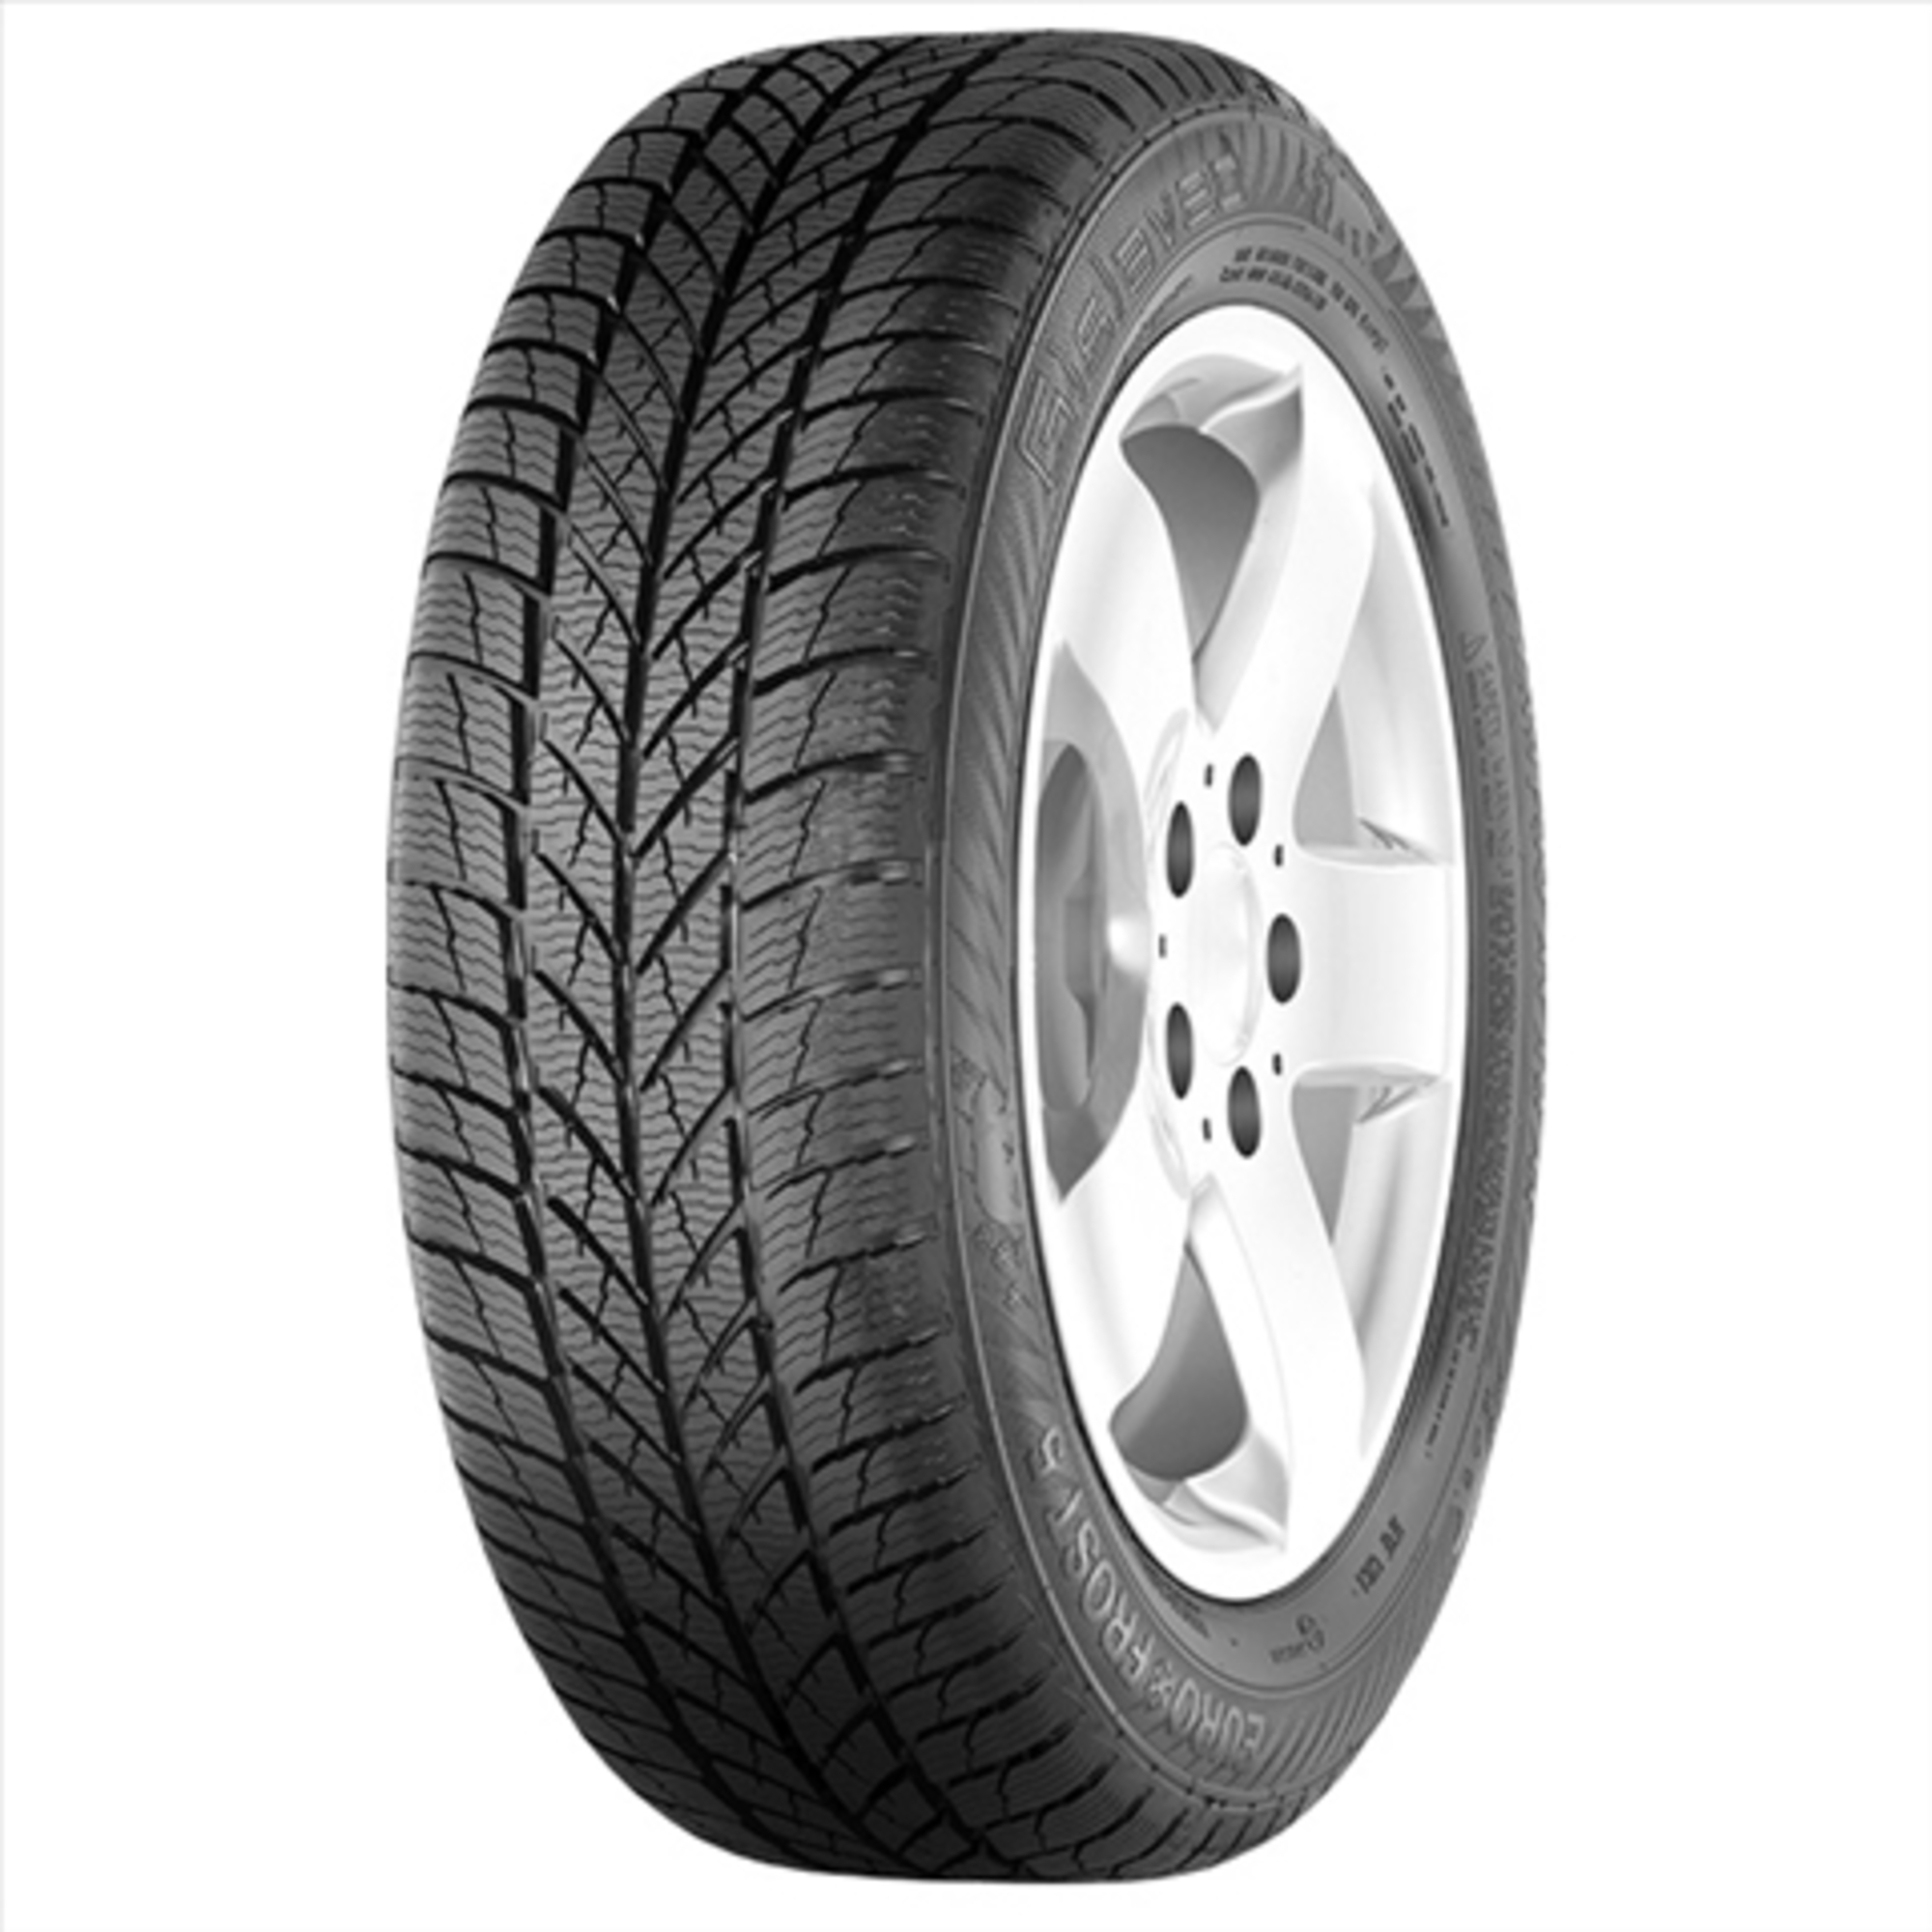 165/70r13 79t tl euro*frost 5 A03432400000CO GISLAVED